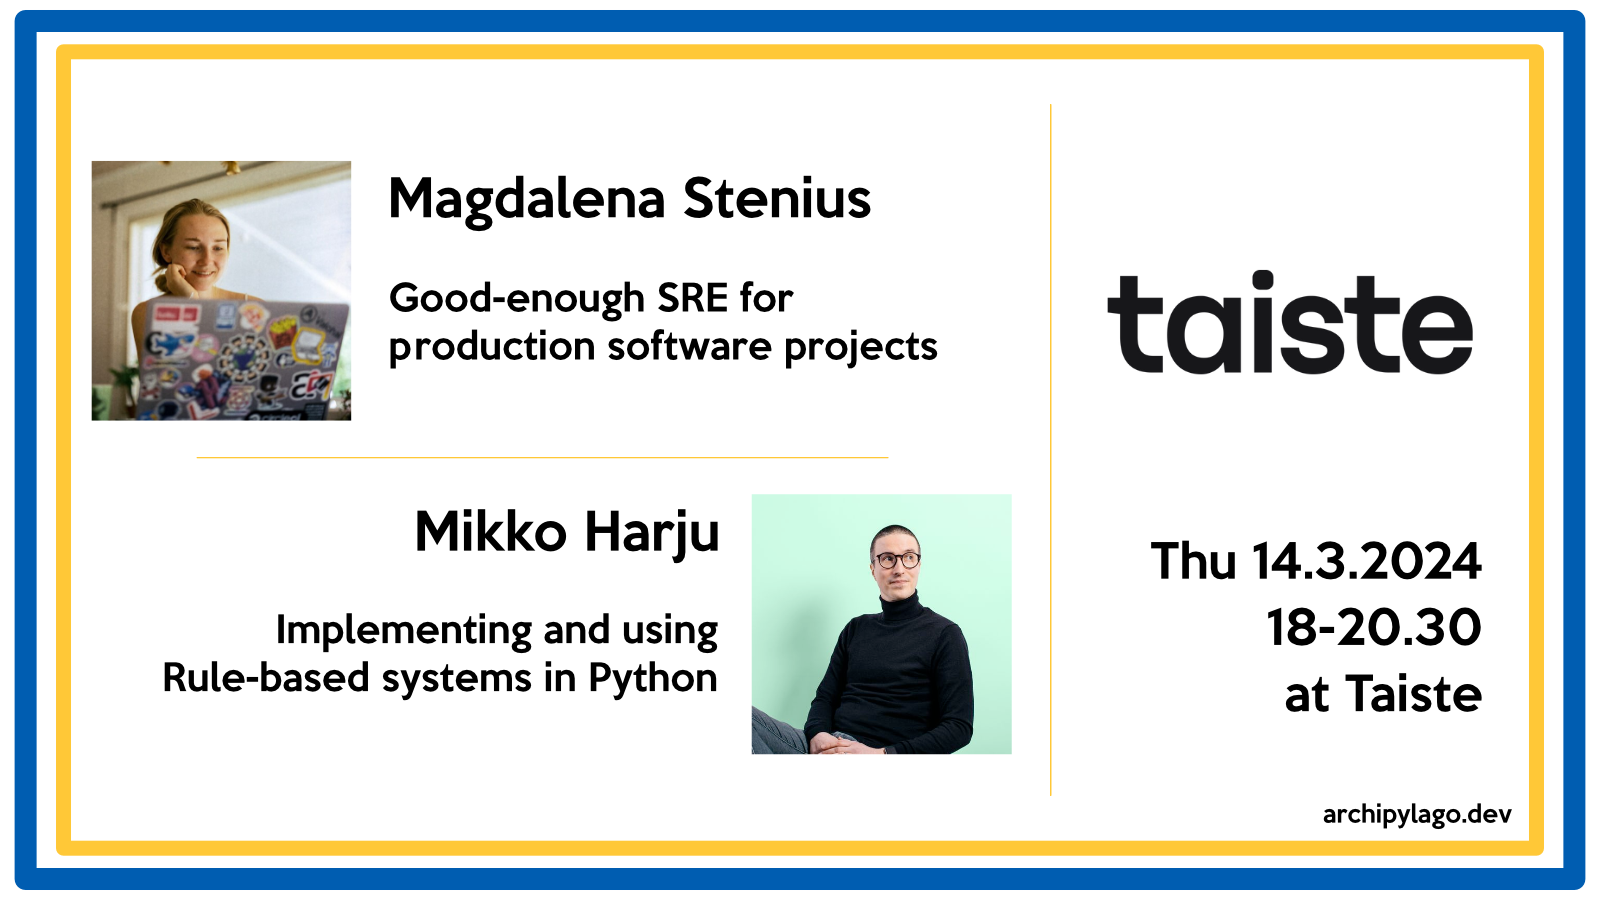 Magdalena Stenius: "Good-enough SRE for production software projects" and Mikko Harju: "Implementing and using Rule-based systems in Python". archipylago at Taiste, Thu 14.3.2024 18-20.30